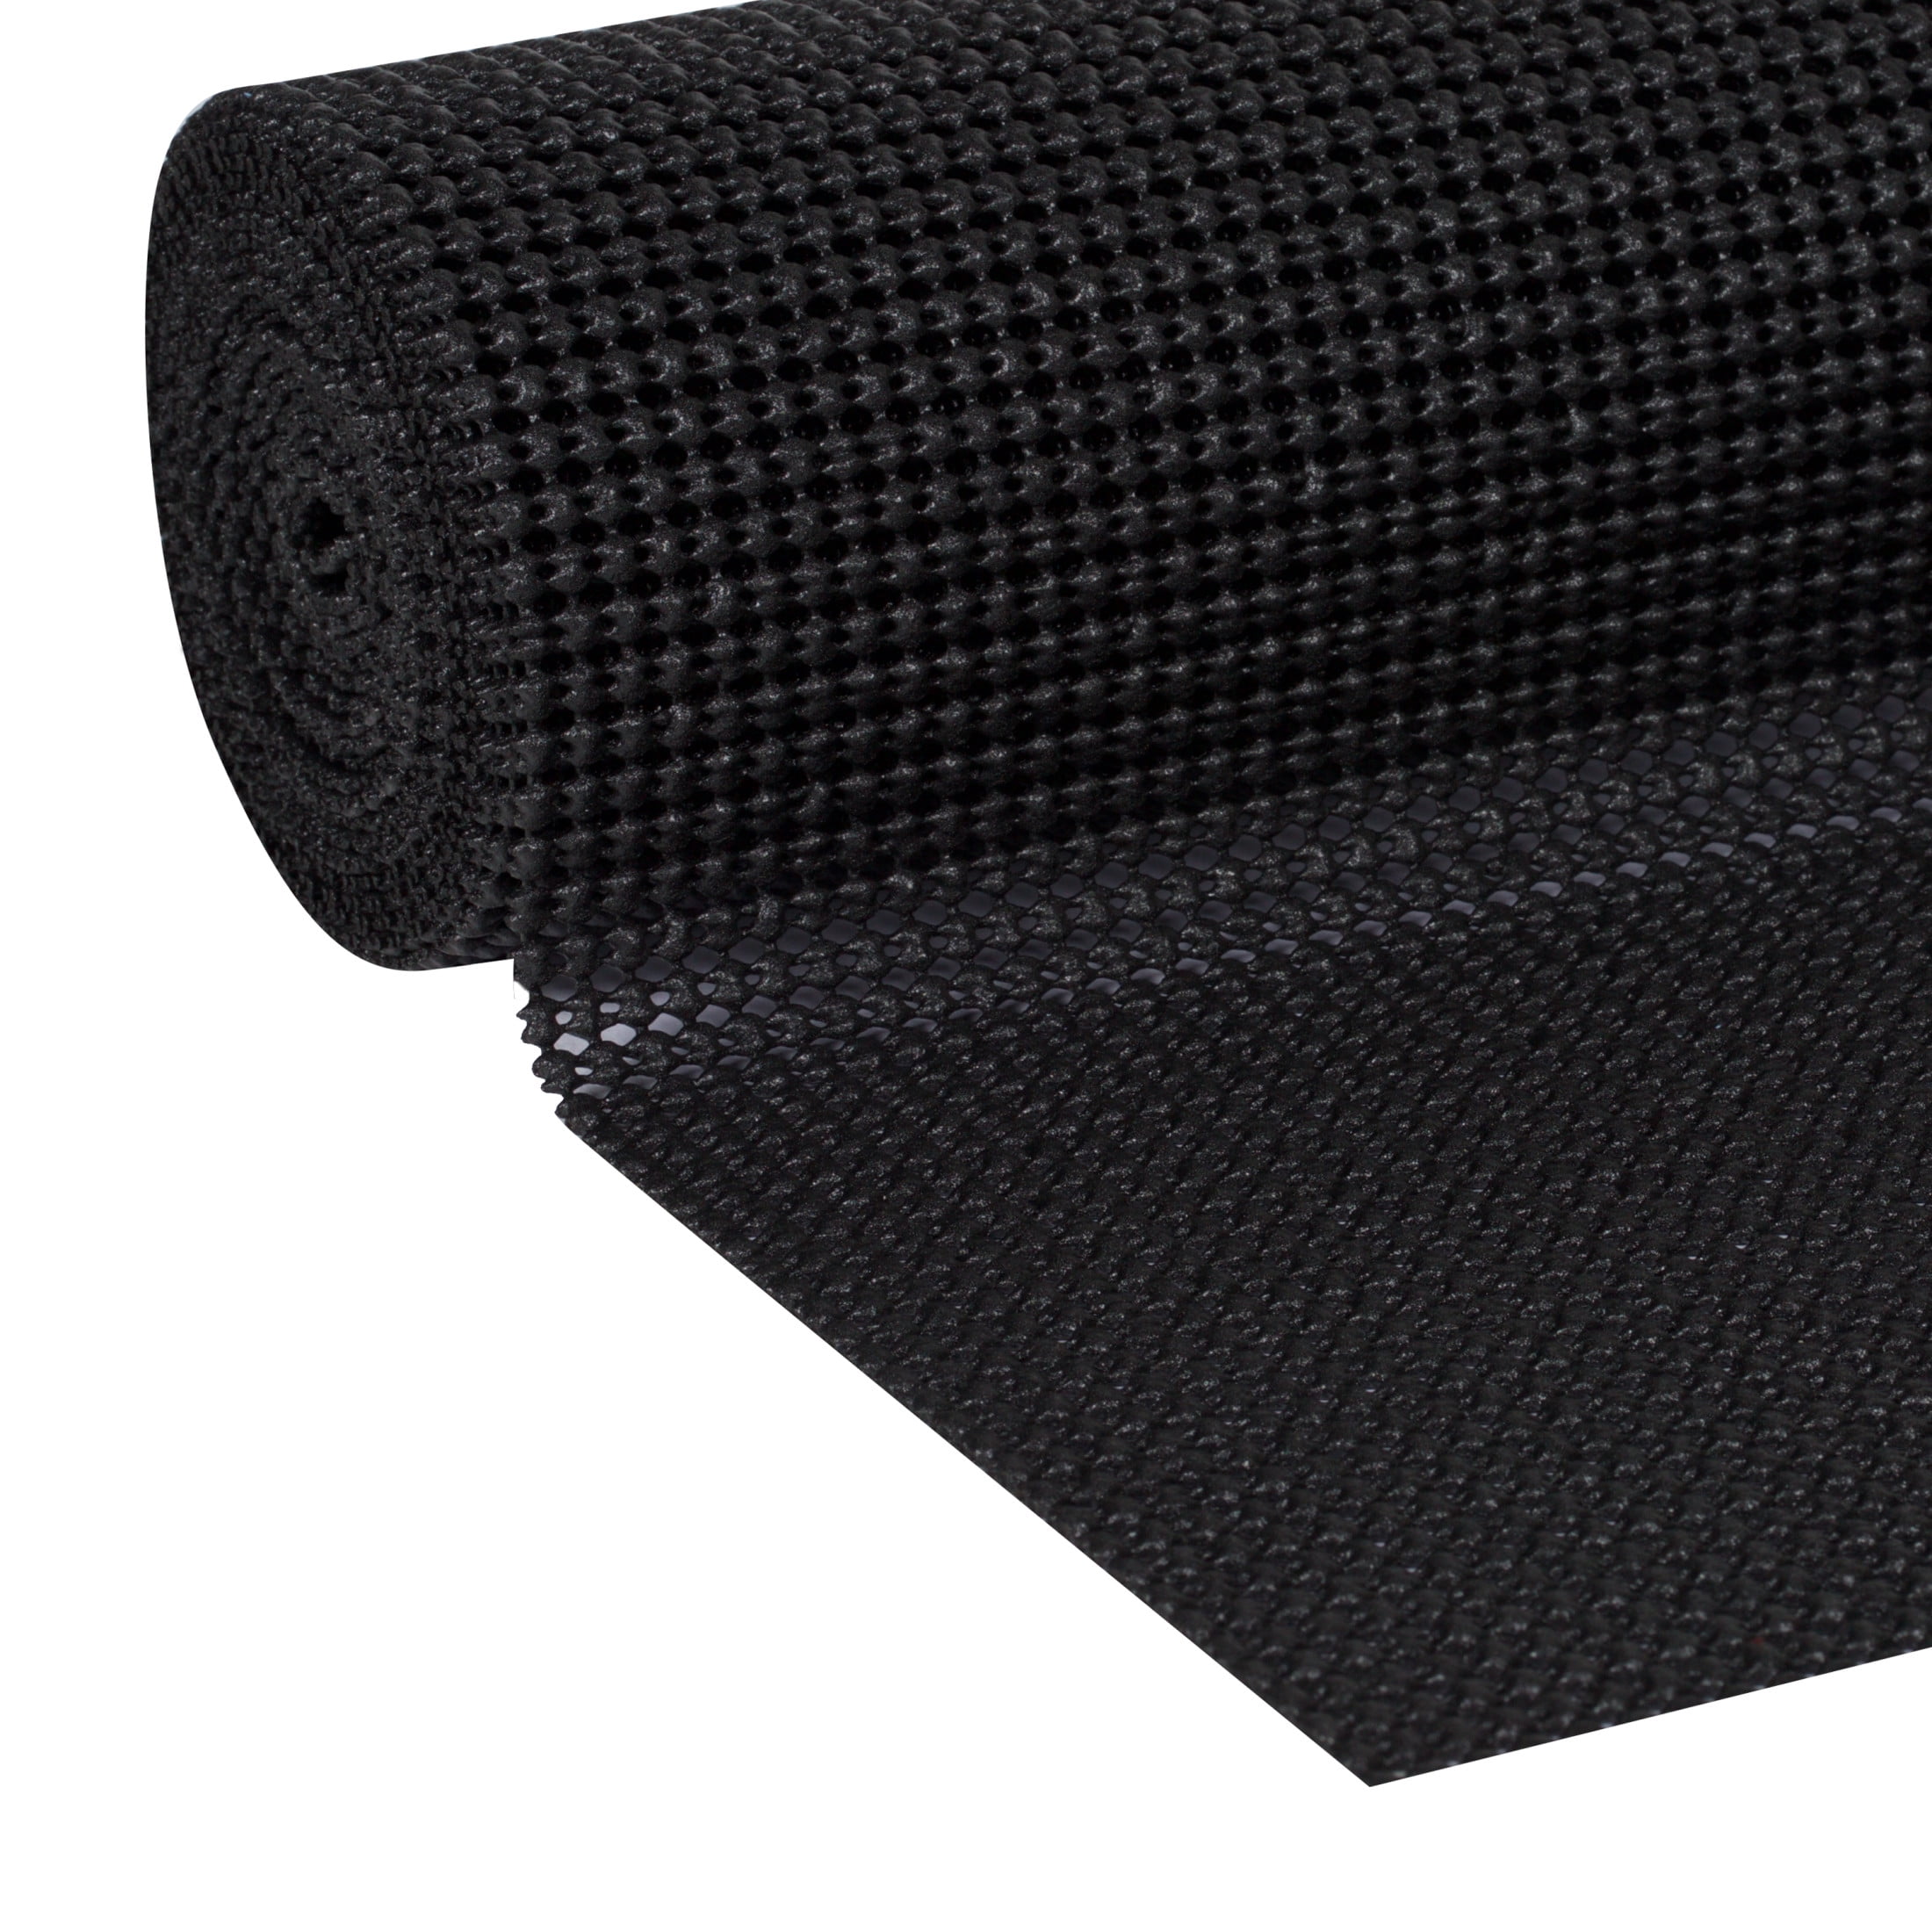 2 PK Grip Liner Select Grip Thicker 12-inch x 4 Feet, New